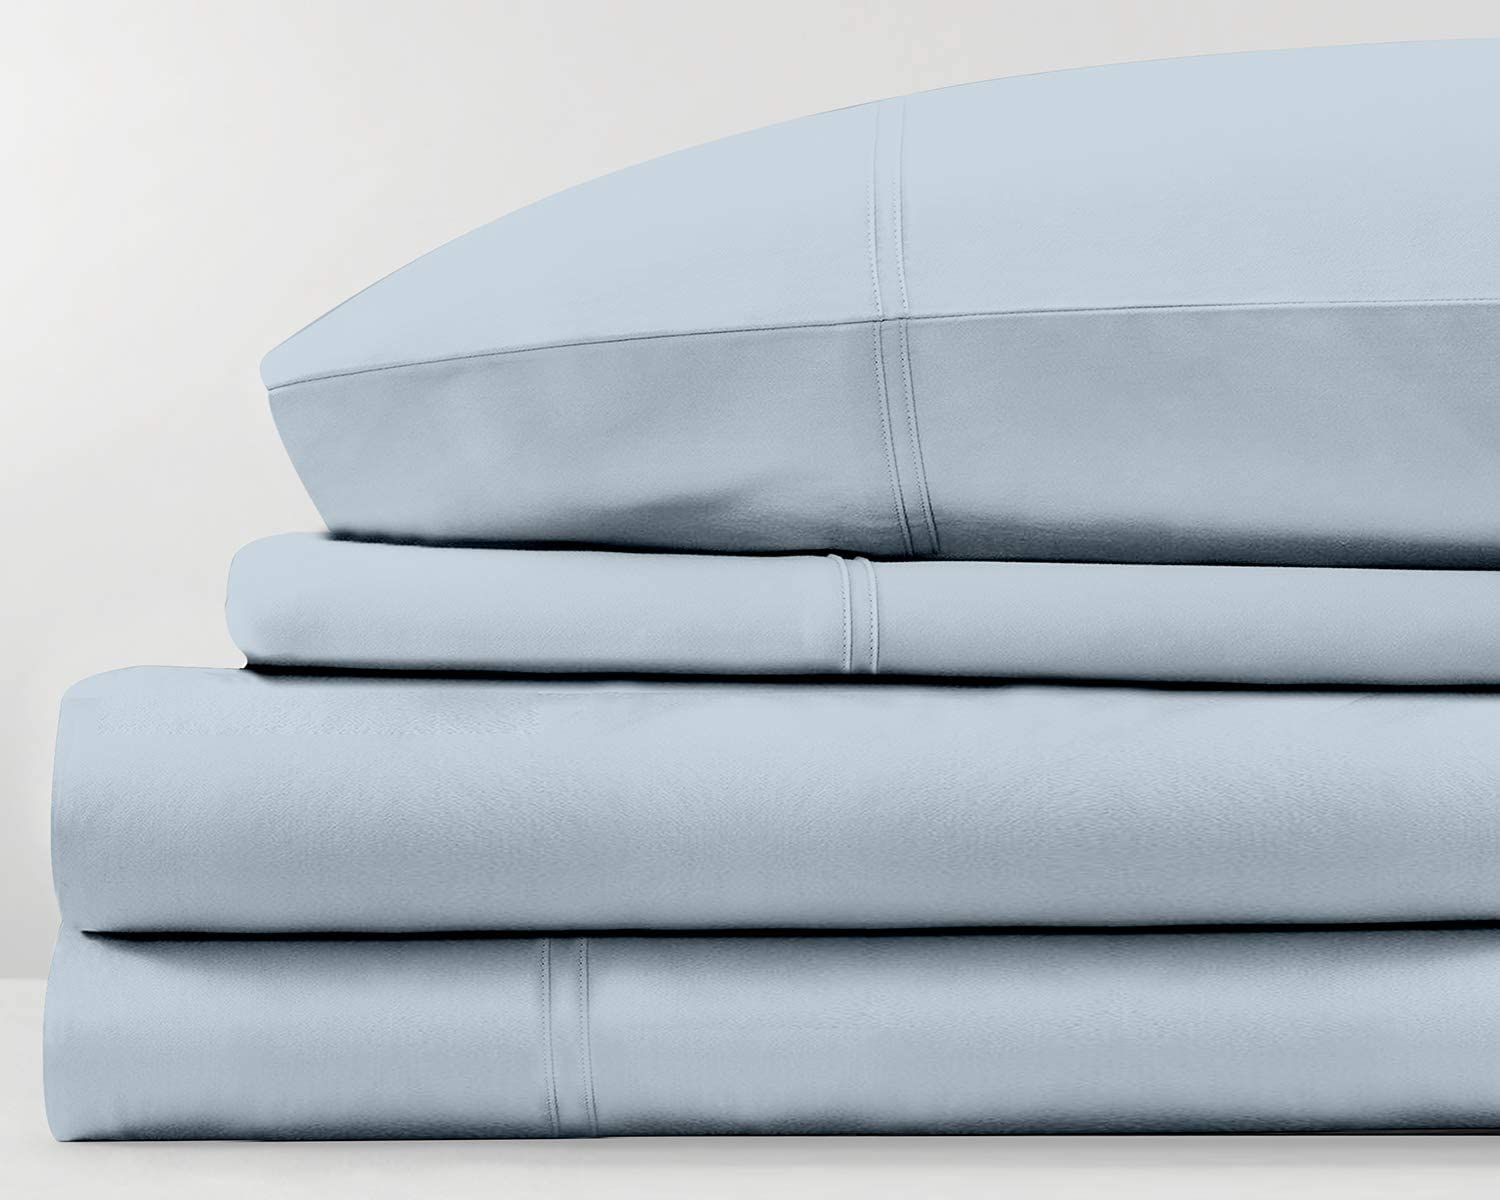 Satee Details about   Royal's Solid White 1000 Thread Count 4pc Queen Bed Sheet Set 100% Cotton 